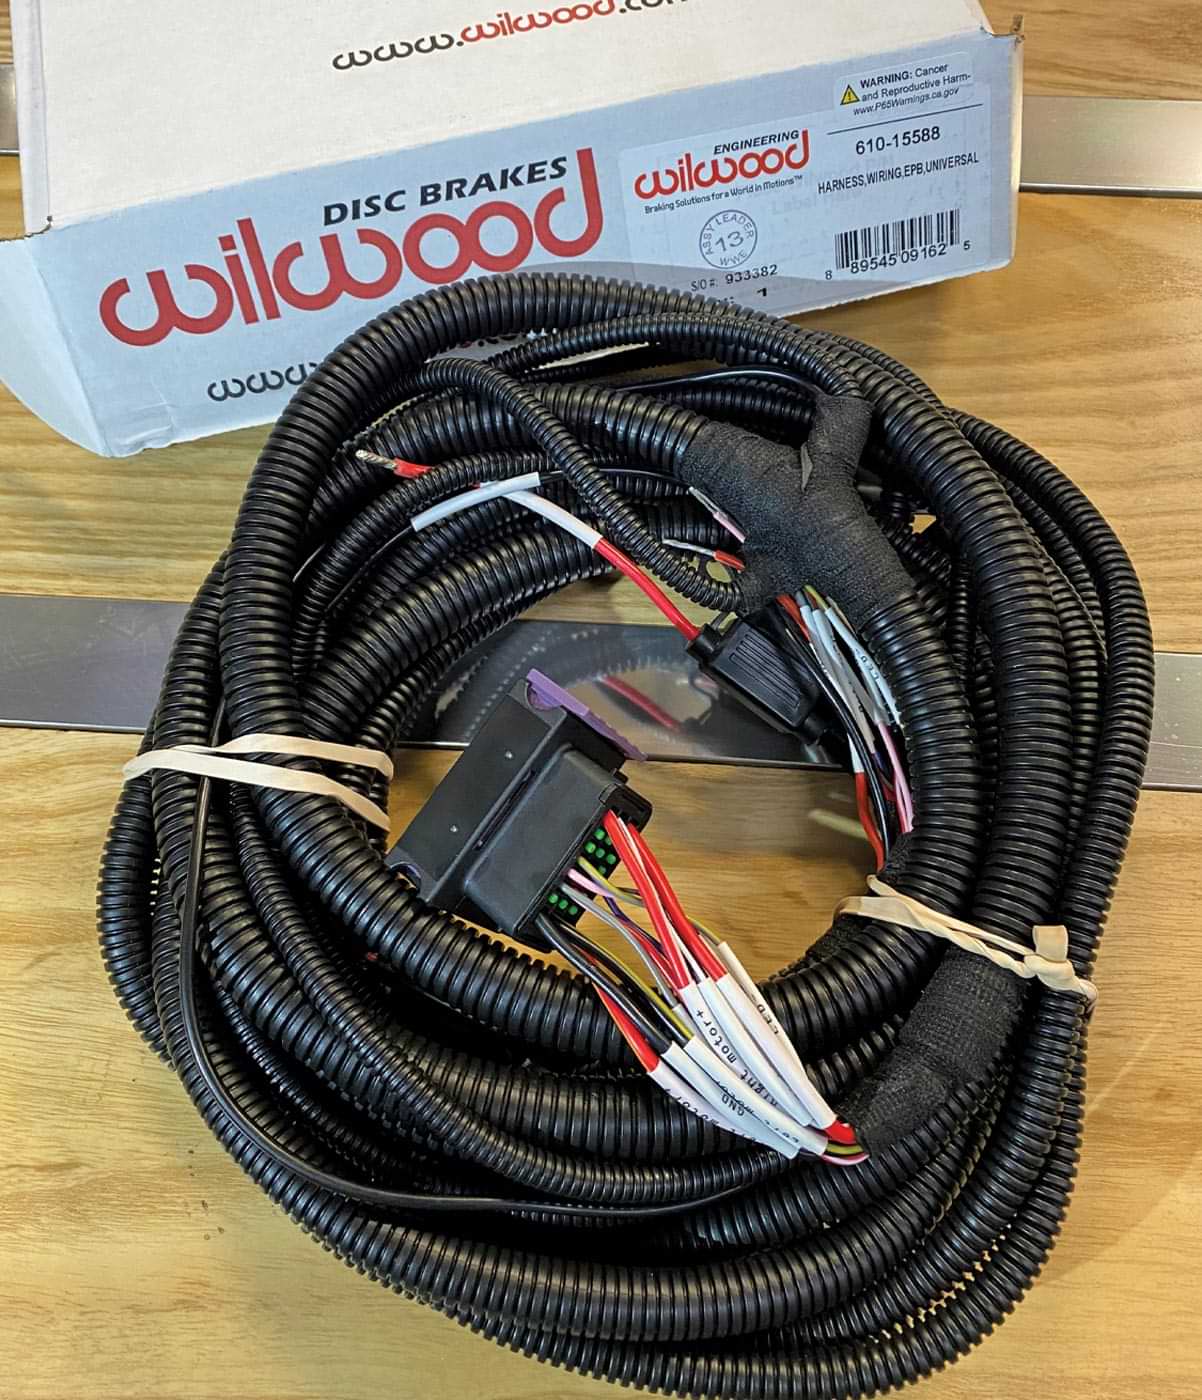 the harness for Wilwood’s EPB kit, fresh out of the box